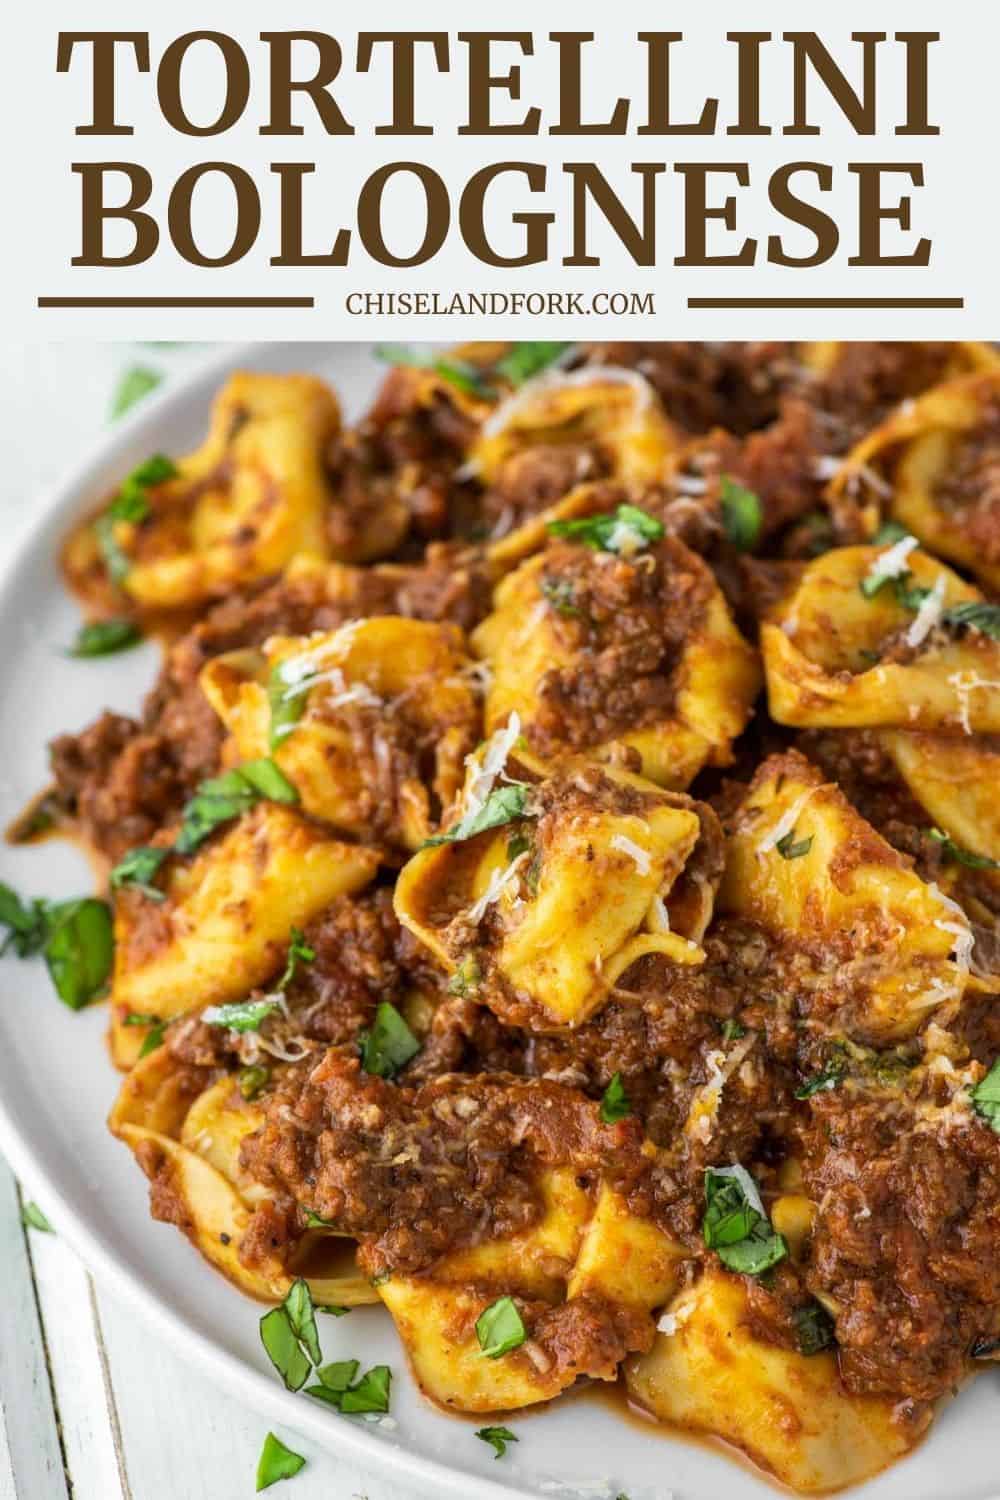 Tortellini Bolognese Recipe - Hearty & Comforting Dish - Chisel & Fork